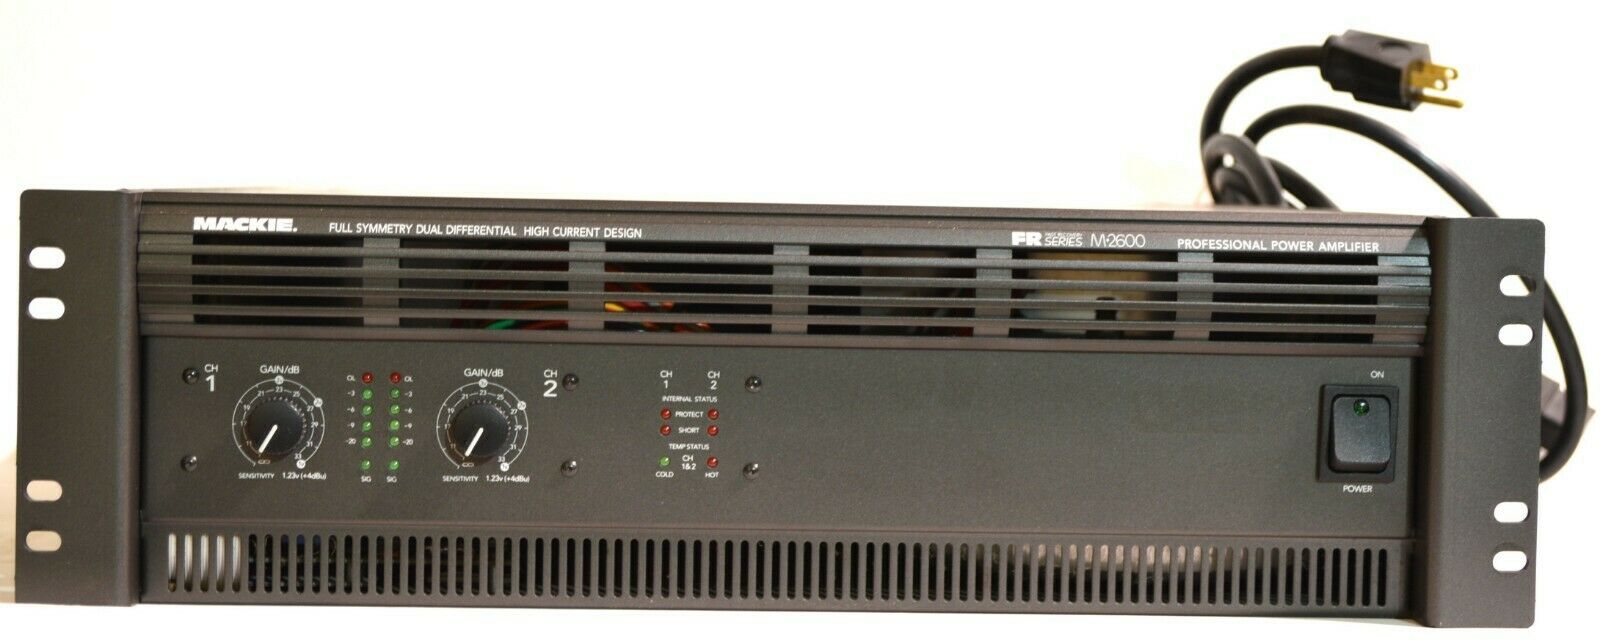 Mackie Products M2600 Power Amplifier AMP EXCELLENT CONDITION